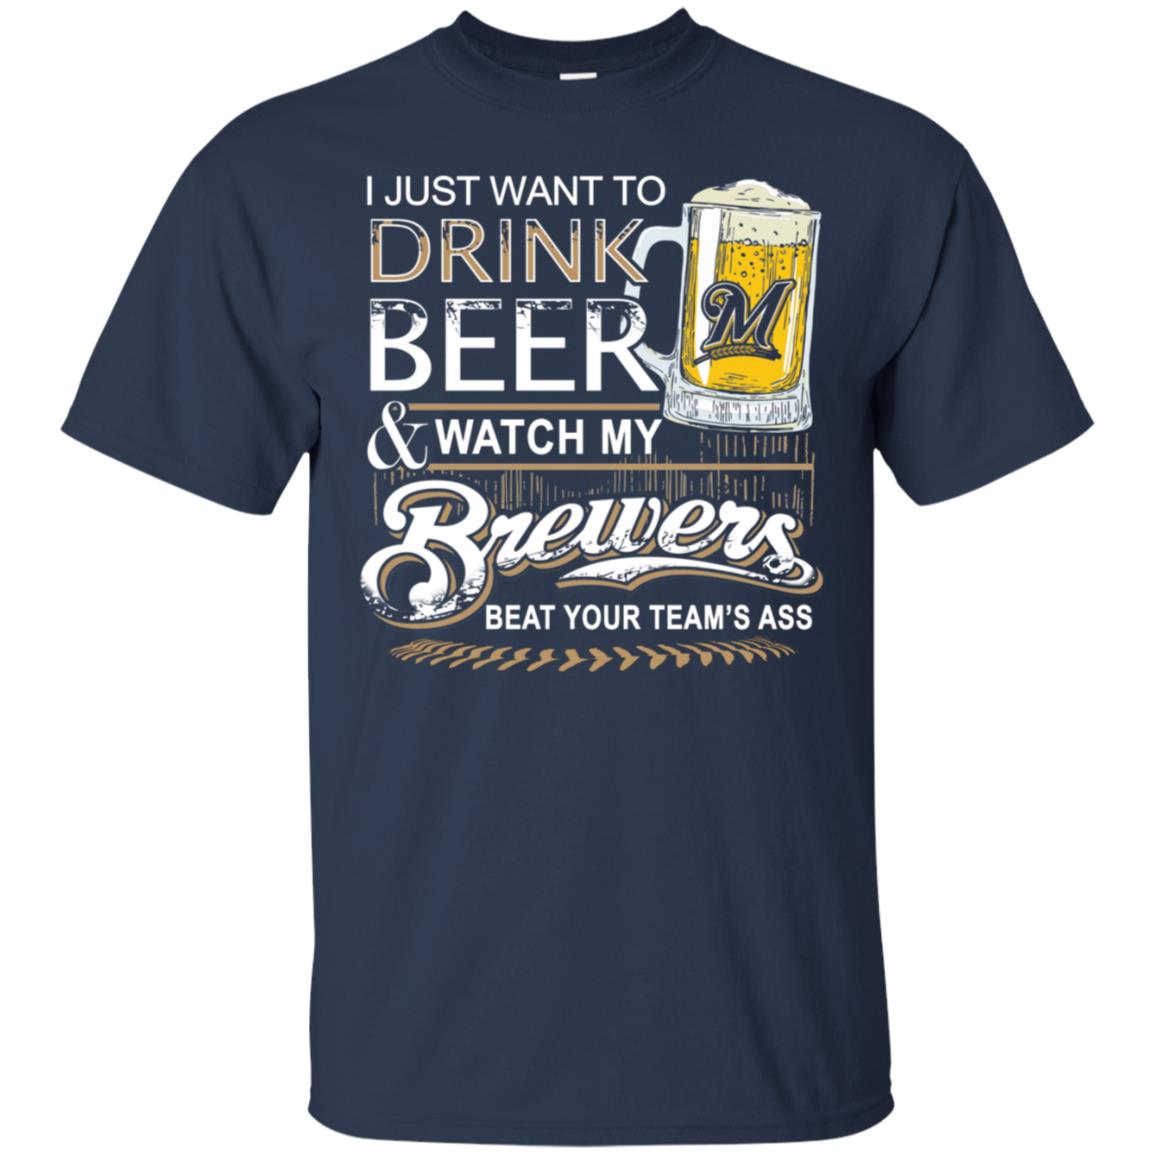 I just want to drink beer and watch my Milwaukee Brewers T shirt, Ls ...